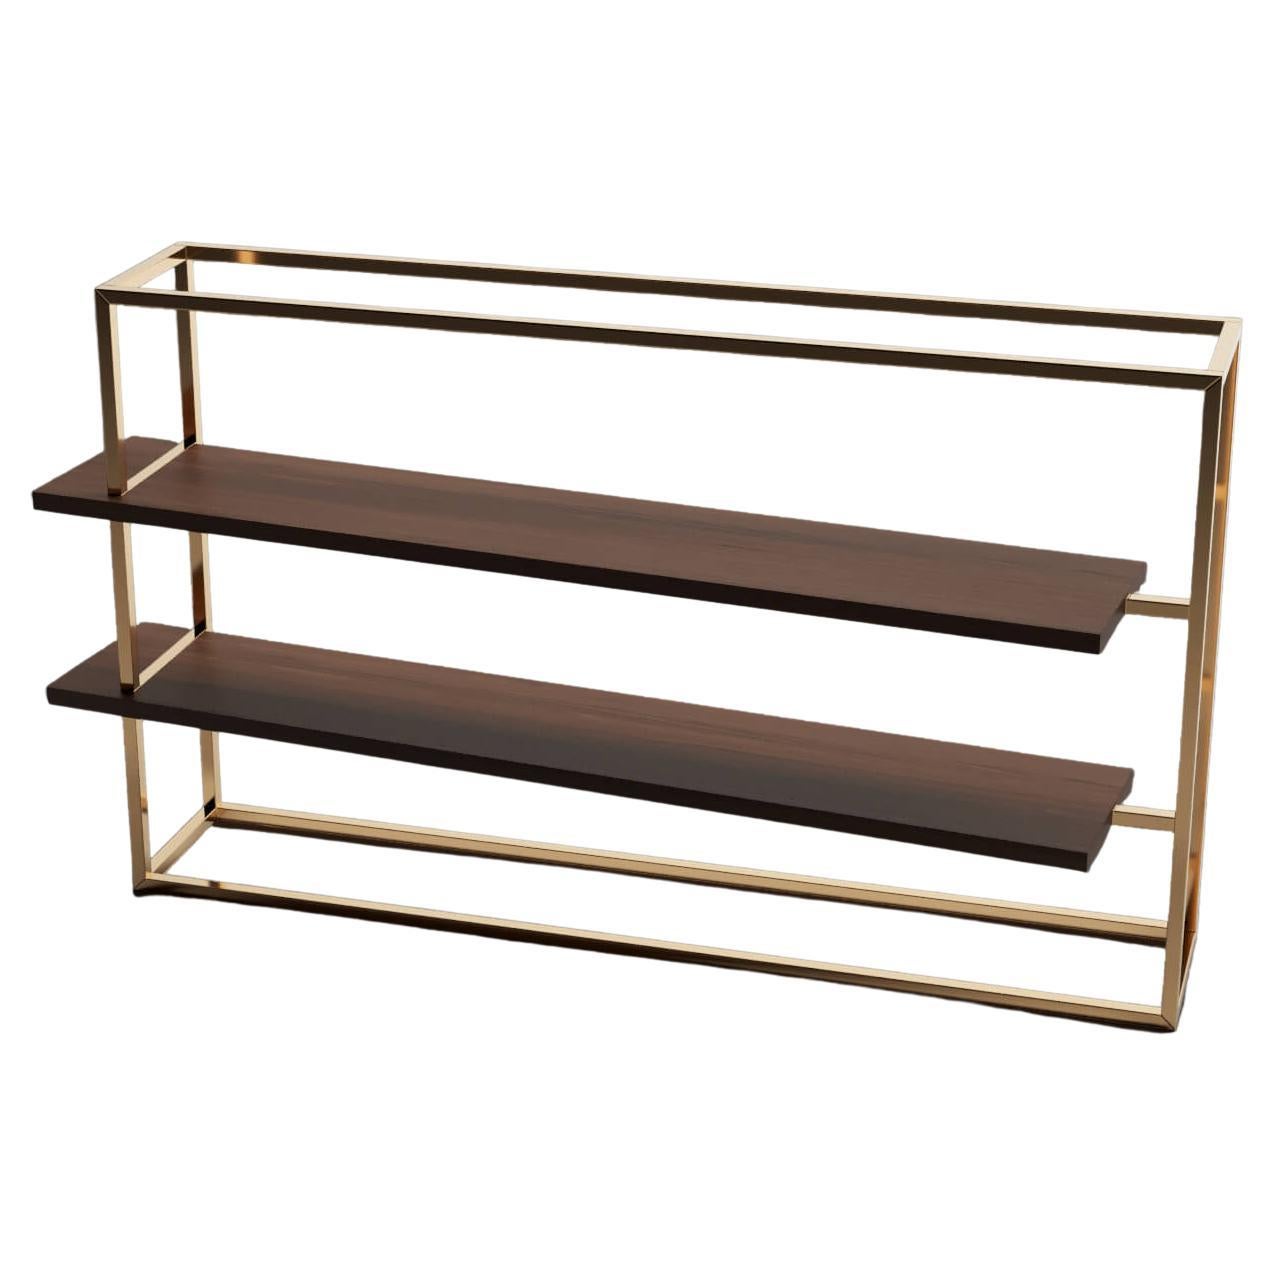 Modern Minimalist Bookcase with Shelves in Walnut Wood and Brushed Brass